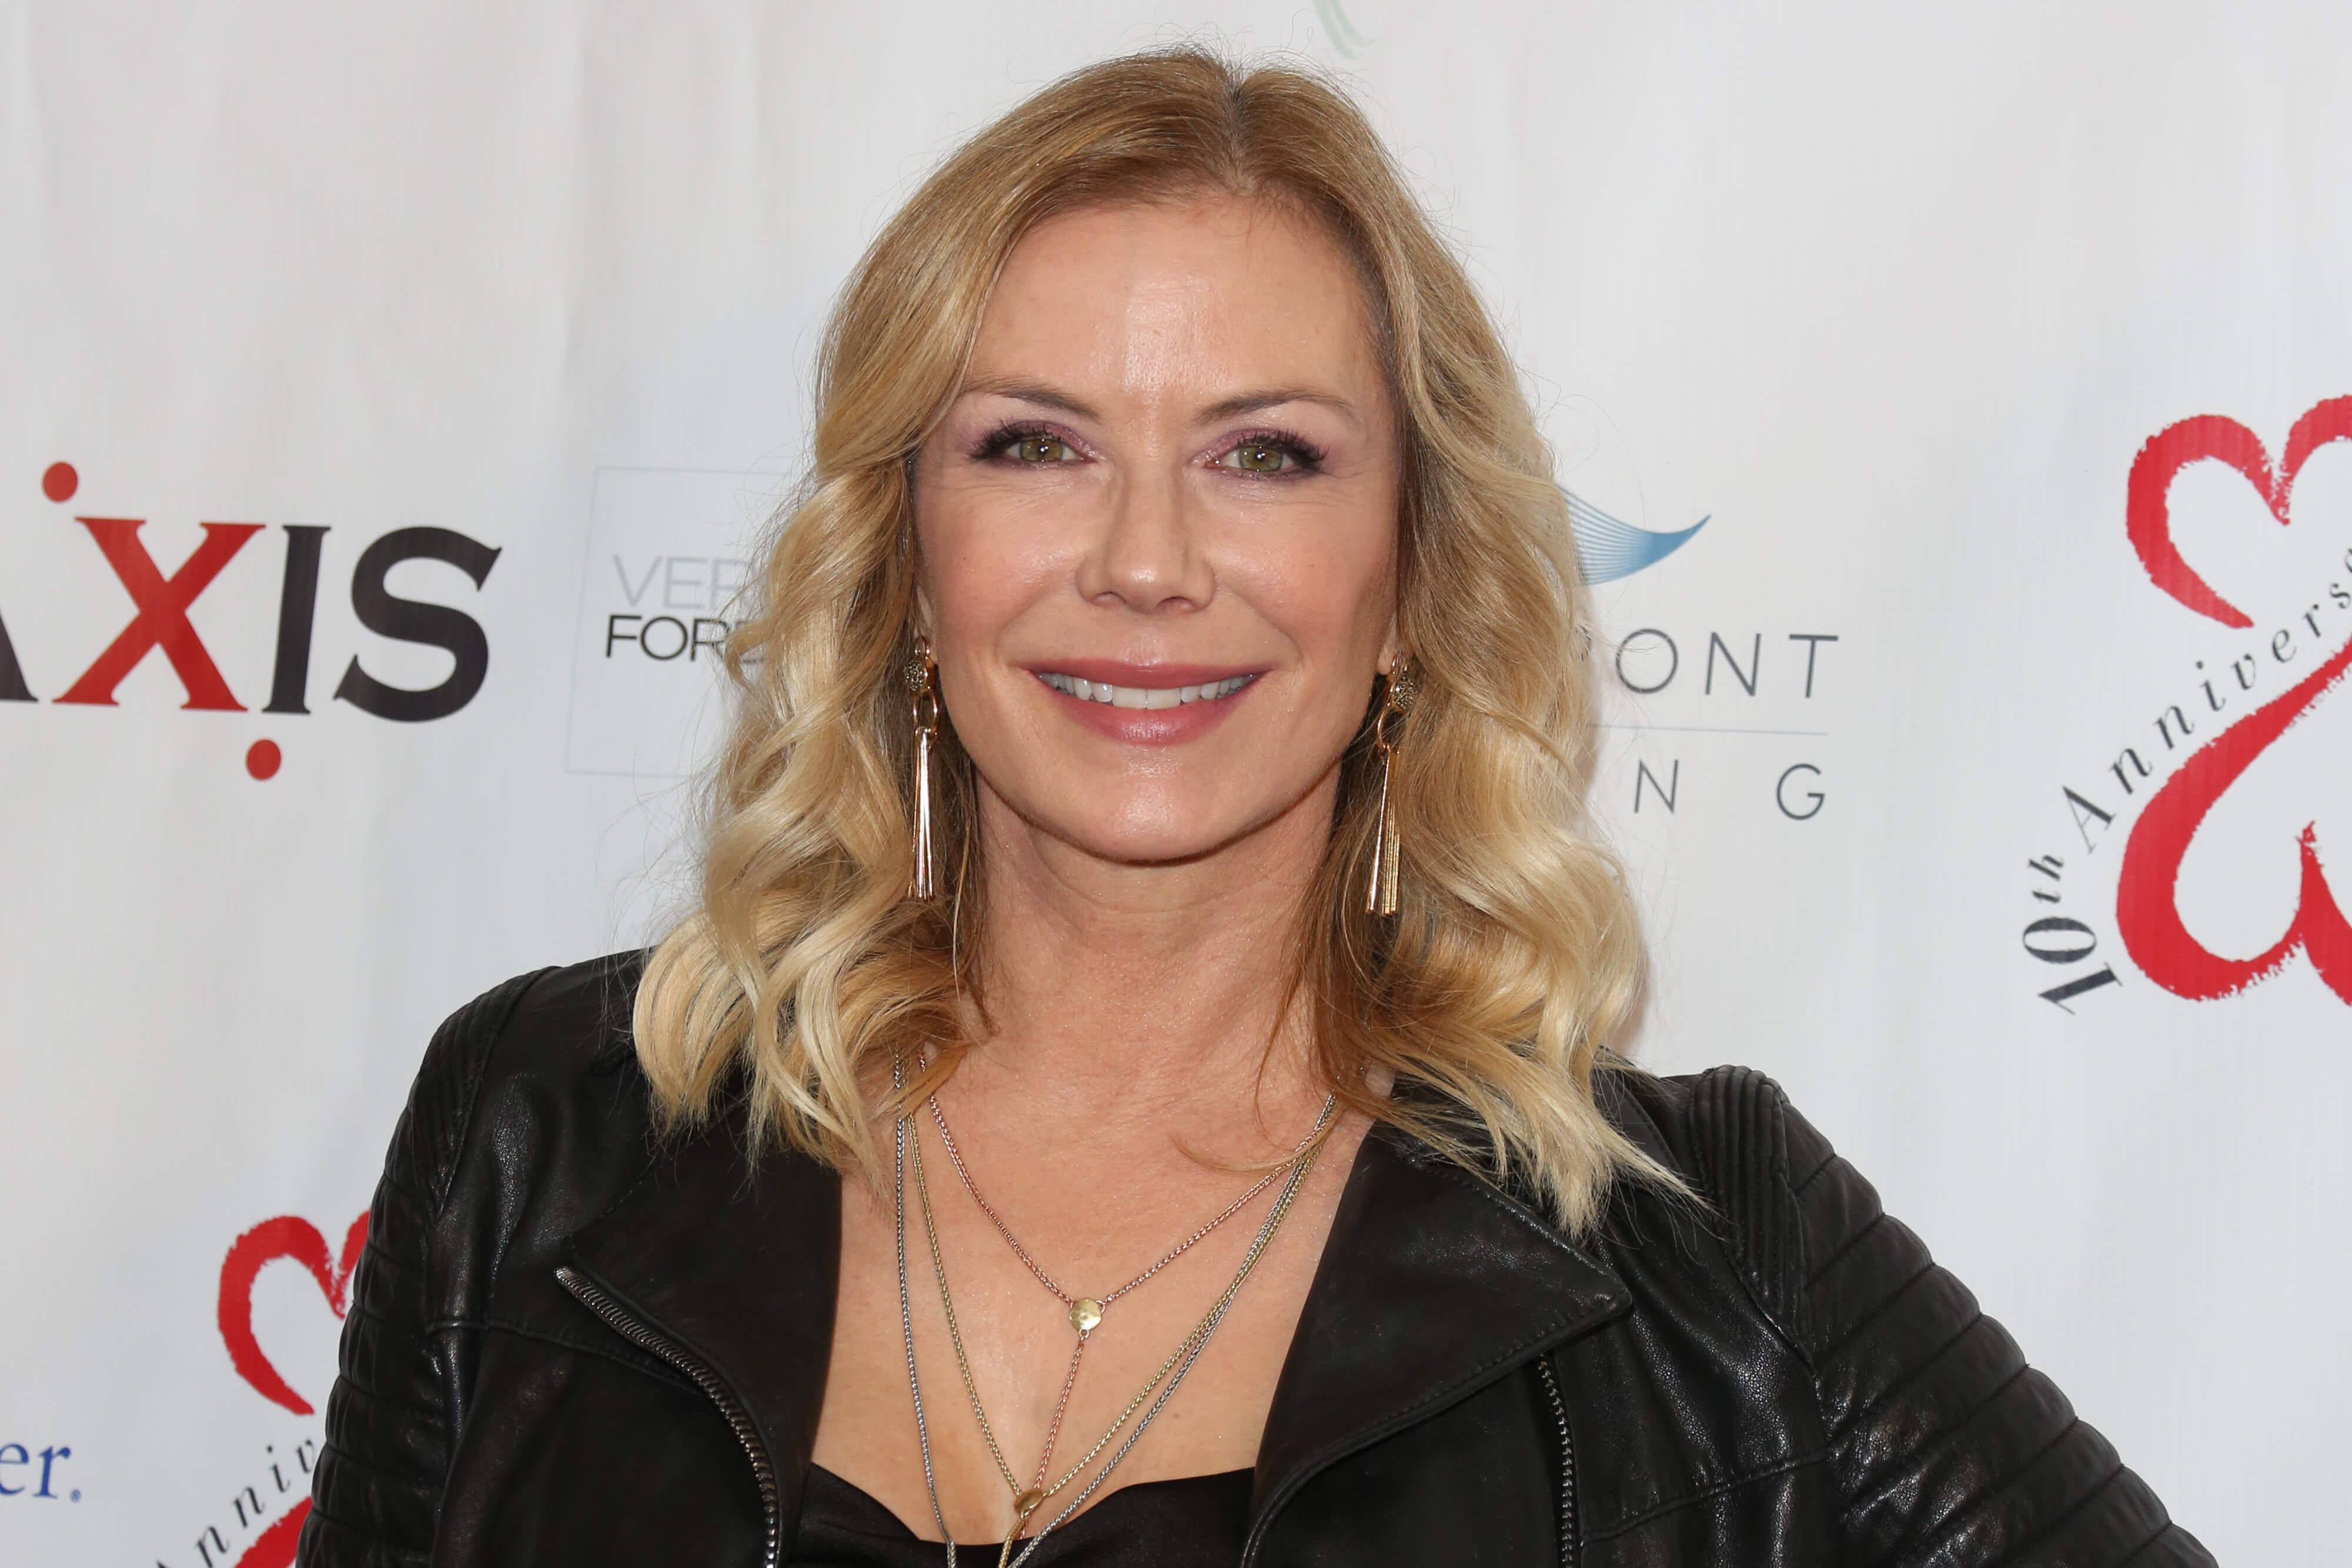 'The Bold and the Beautiful' star Katherine Kelly Lang dressed in a black outfit, smiling for a red carpet photo.